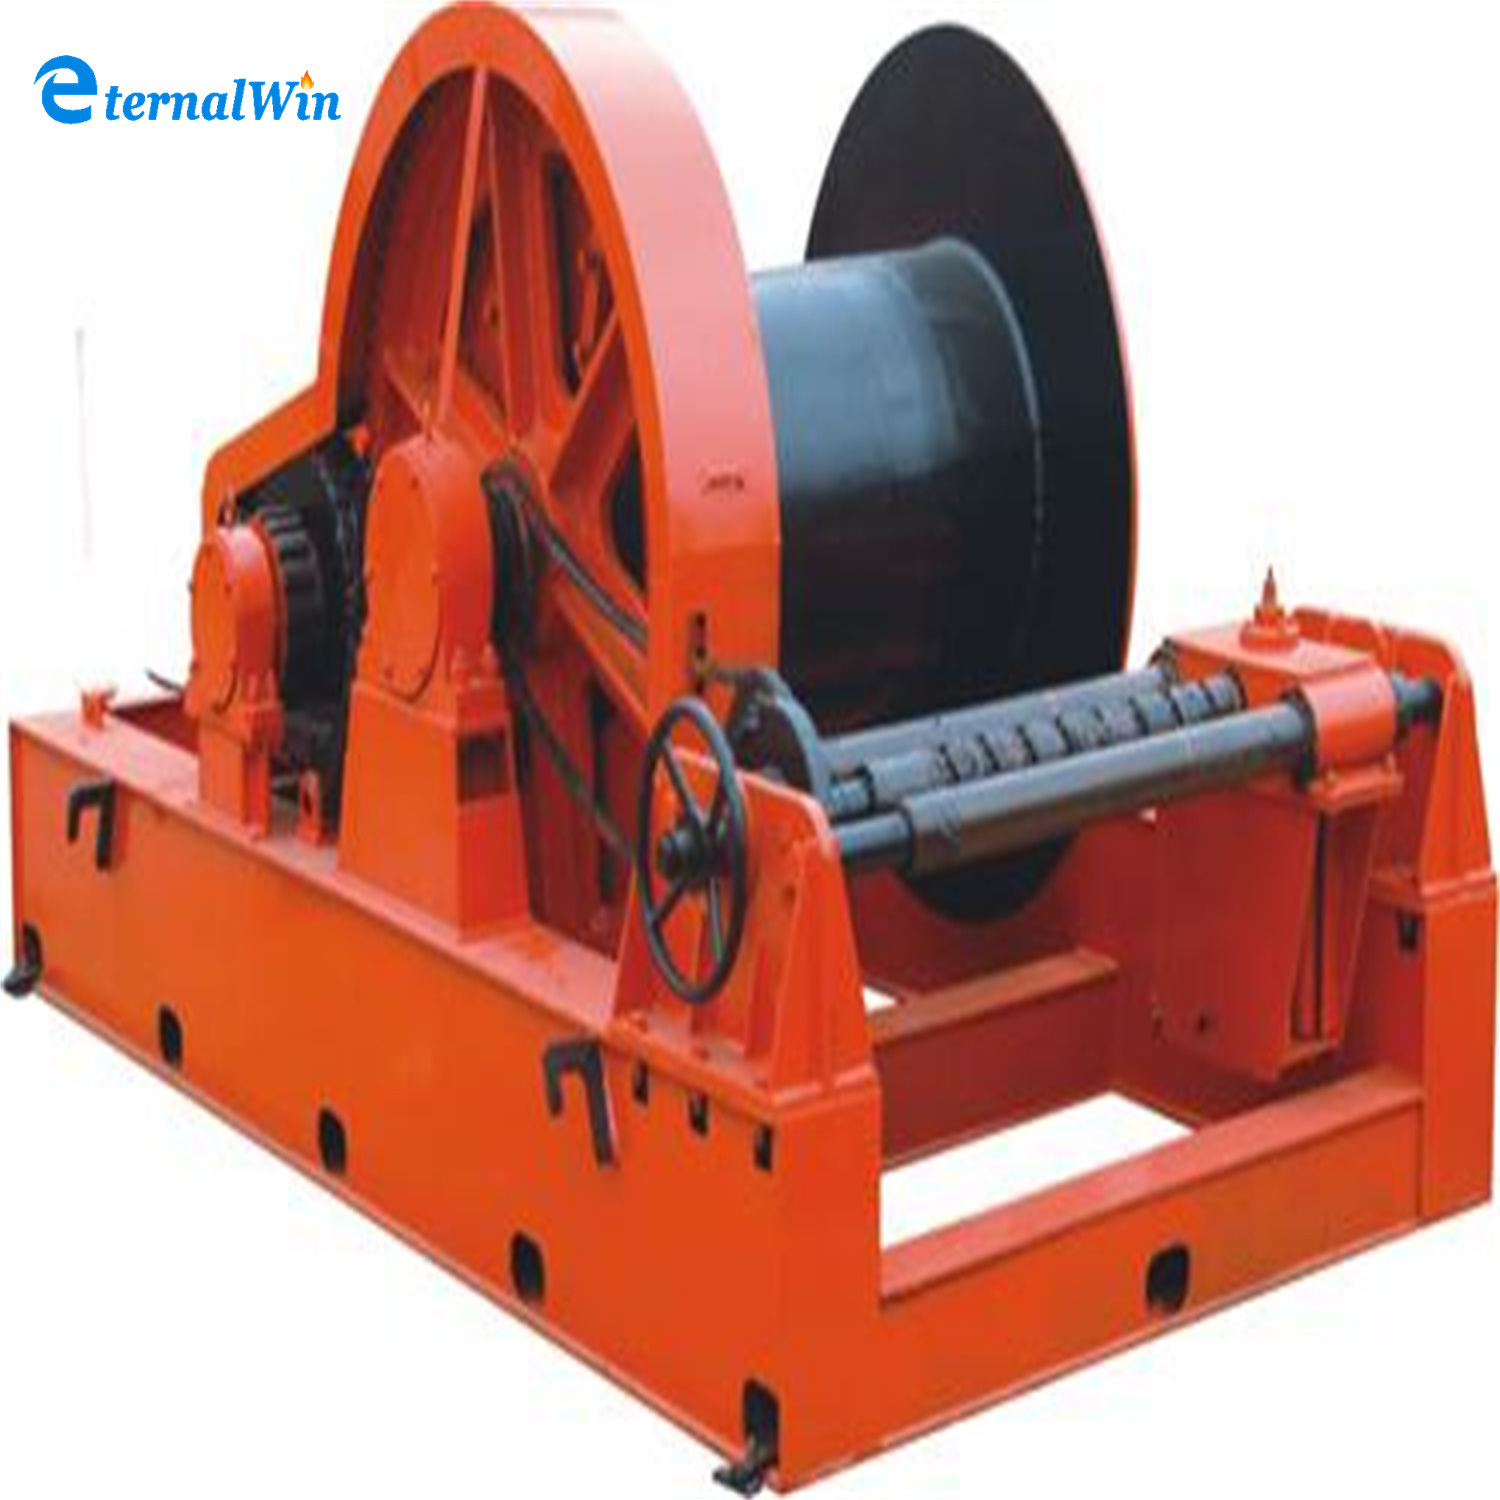 Hydraulic Electric Lifting Winch with Failsafe Brake for Tractors/Anchor/Excavator/Shrimp Boat/Fish Boat